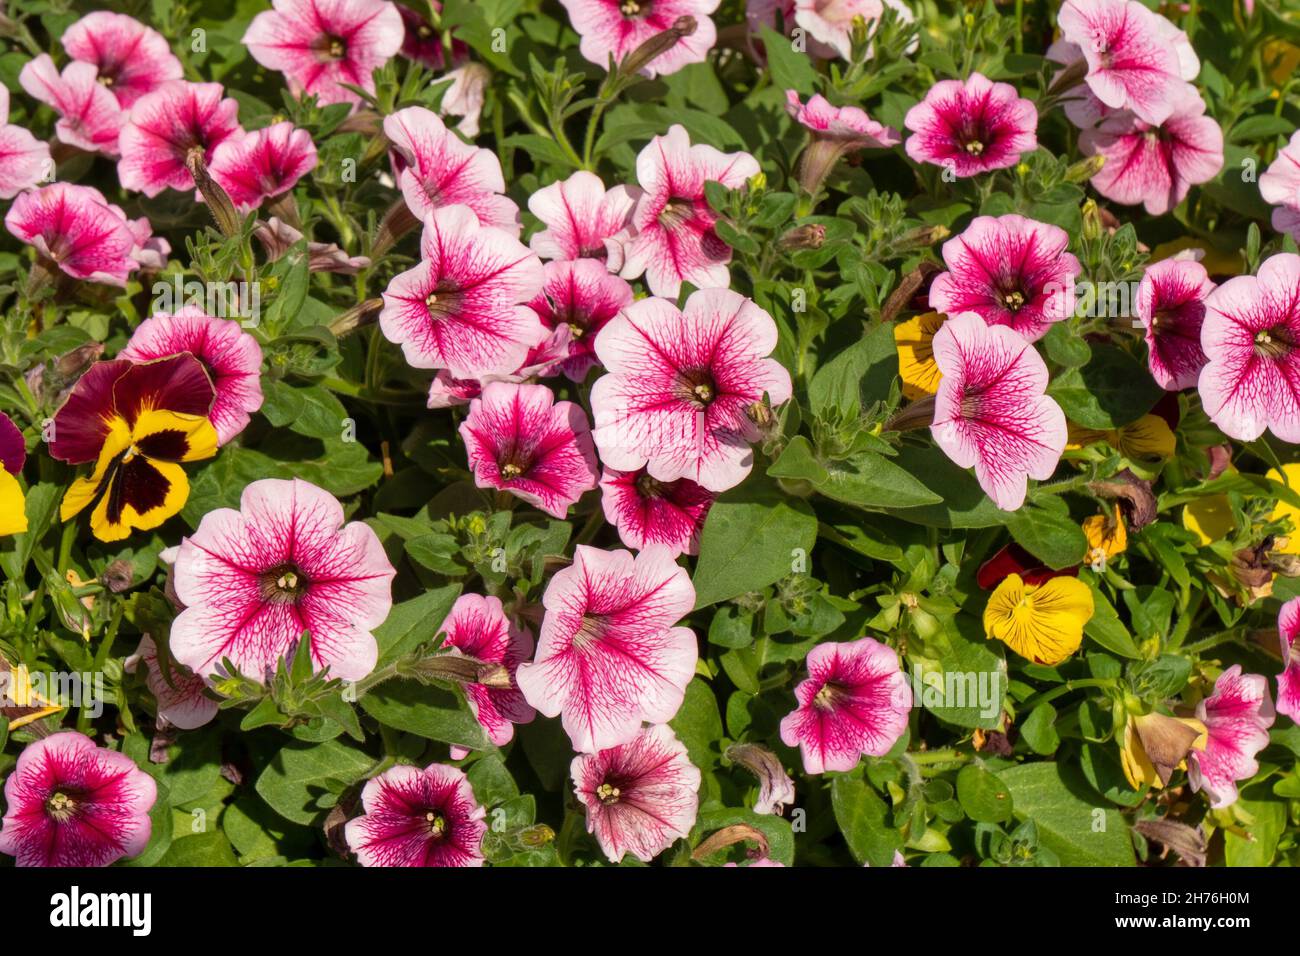 Beautiful hybrid pink petunias bloom on a sunny day in summer. Stock Photo